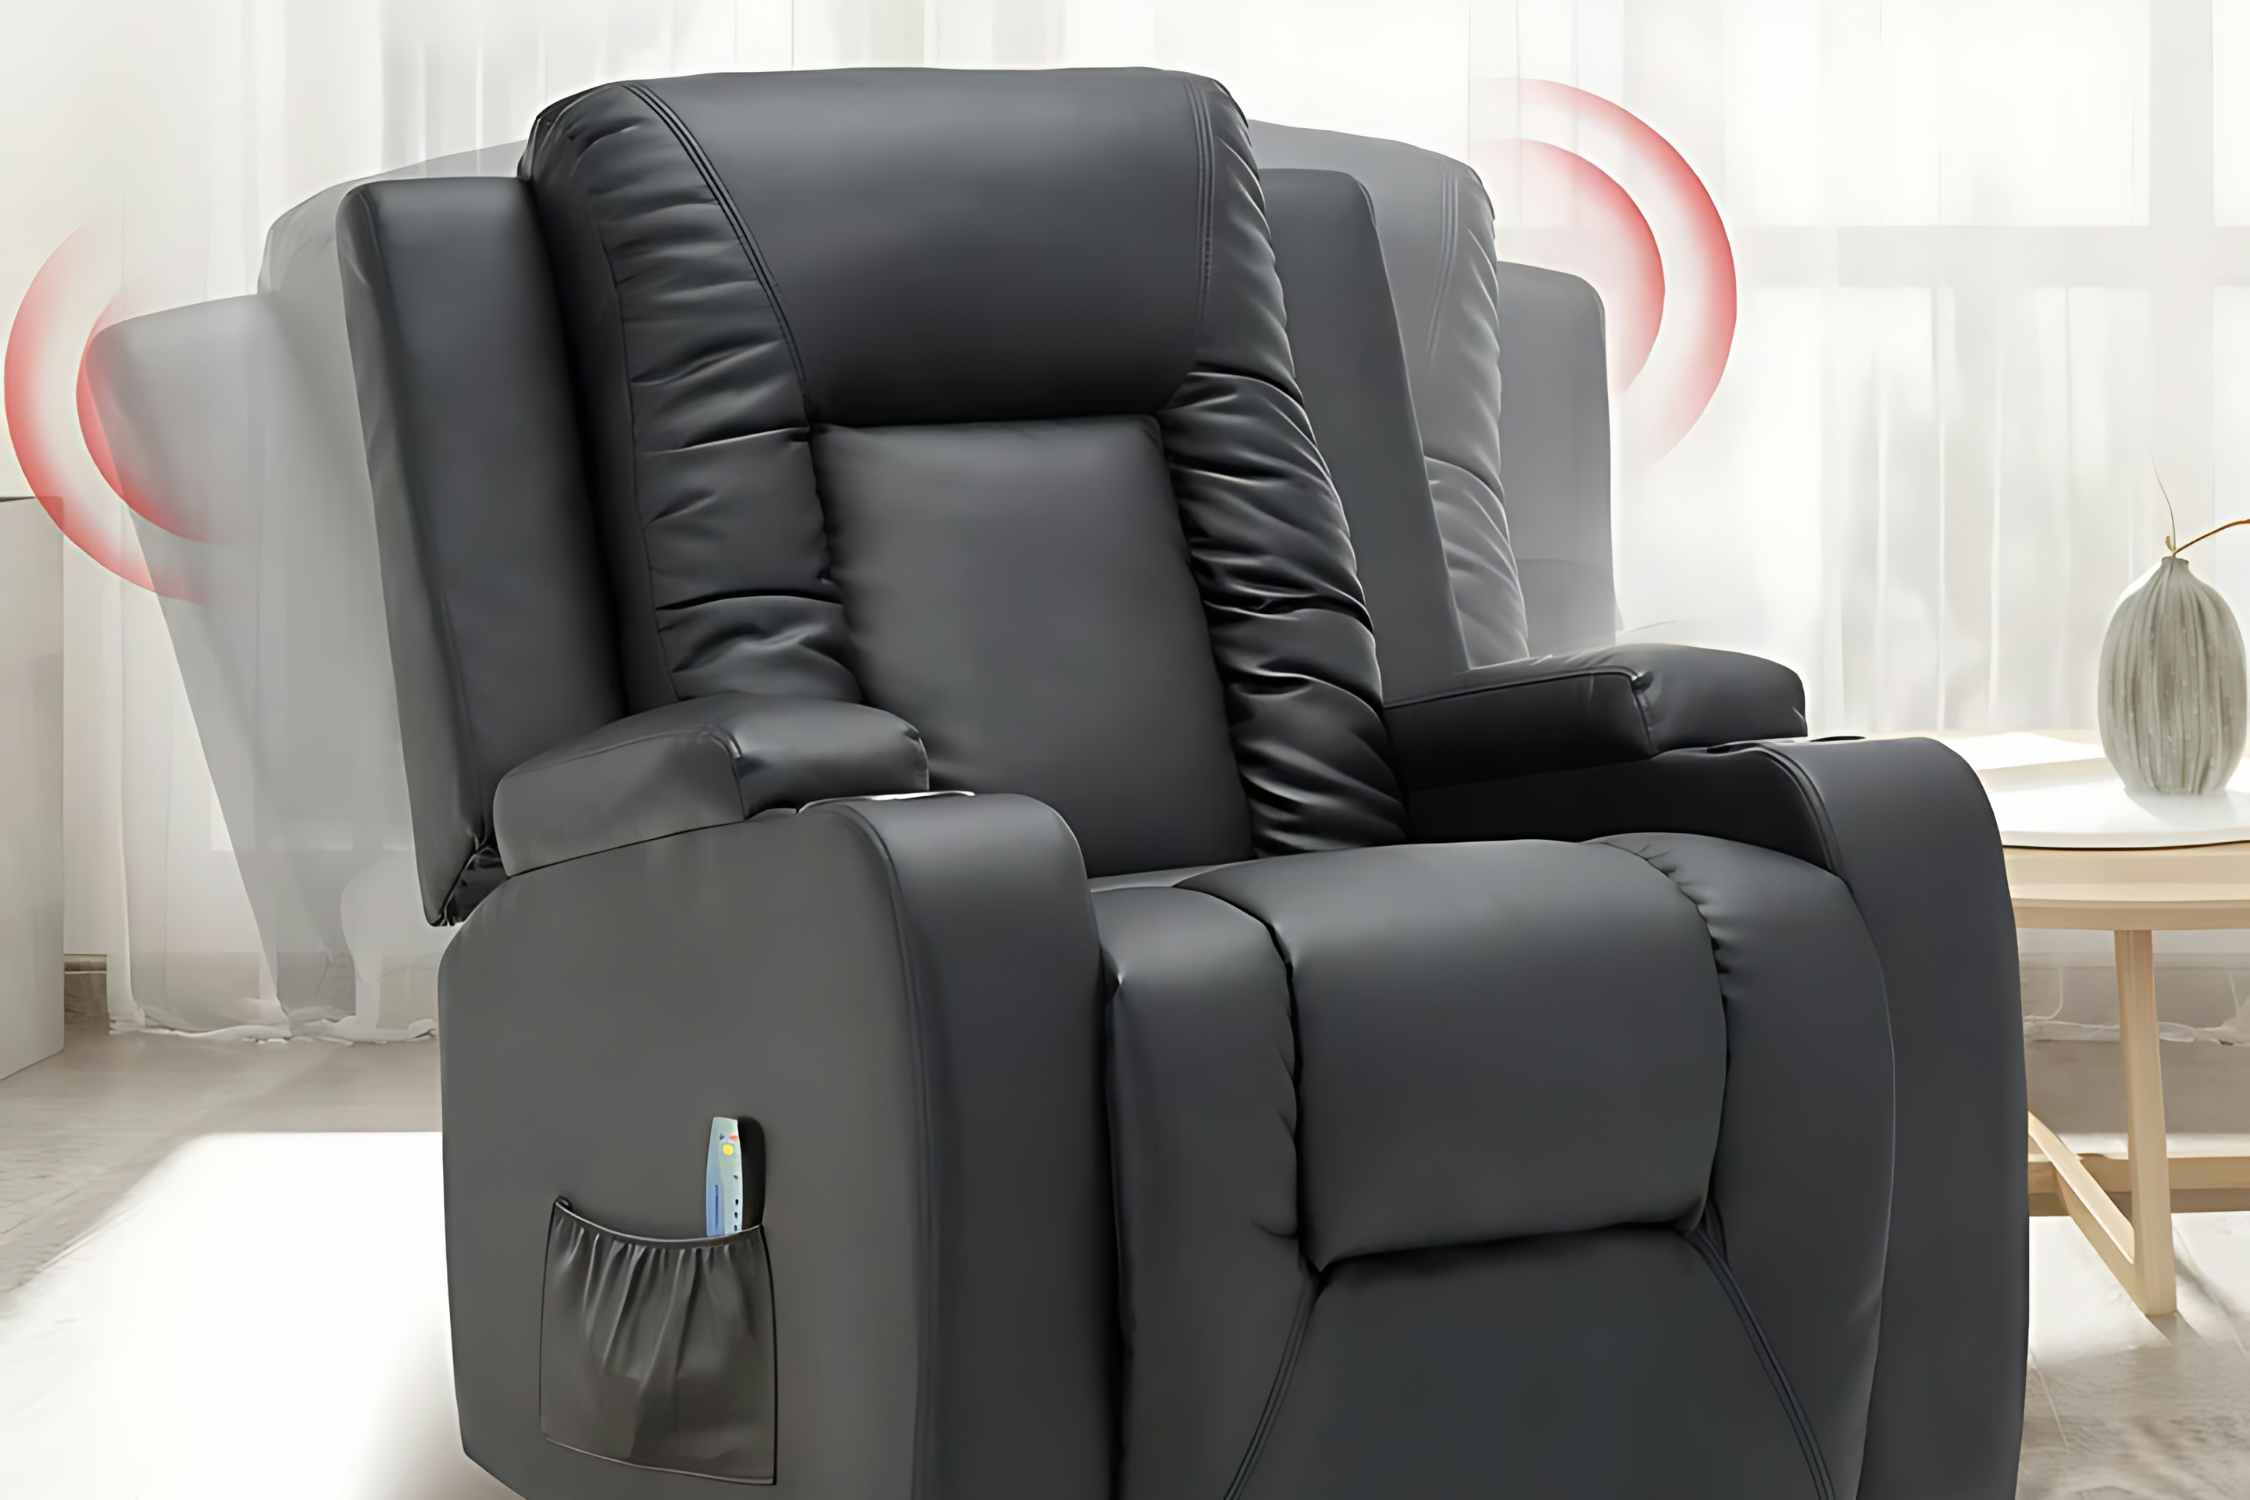 Heated and Massage Recliner, as Low as $317 at Wayfair (Reg. $1,030)